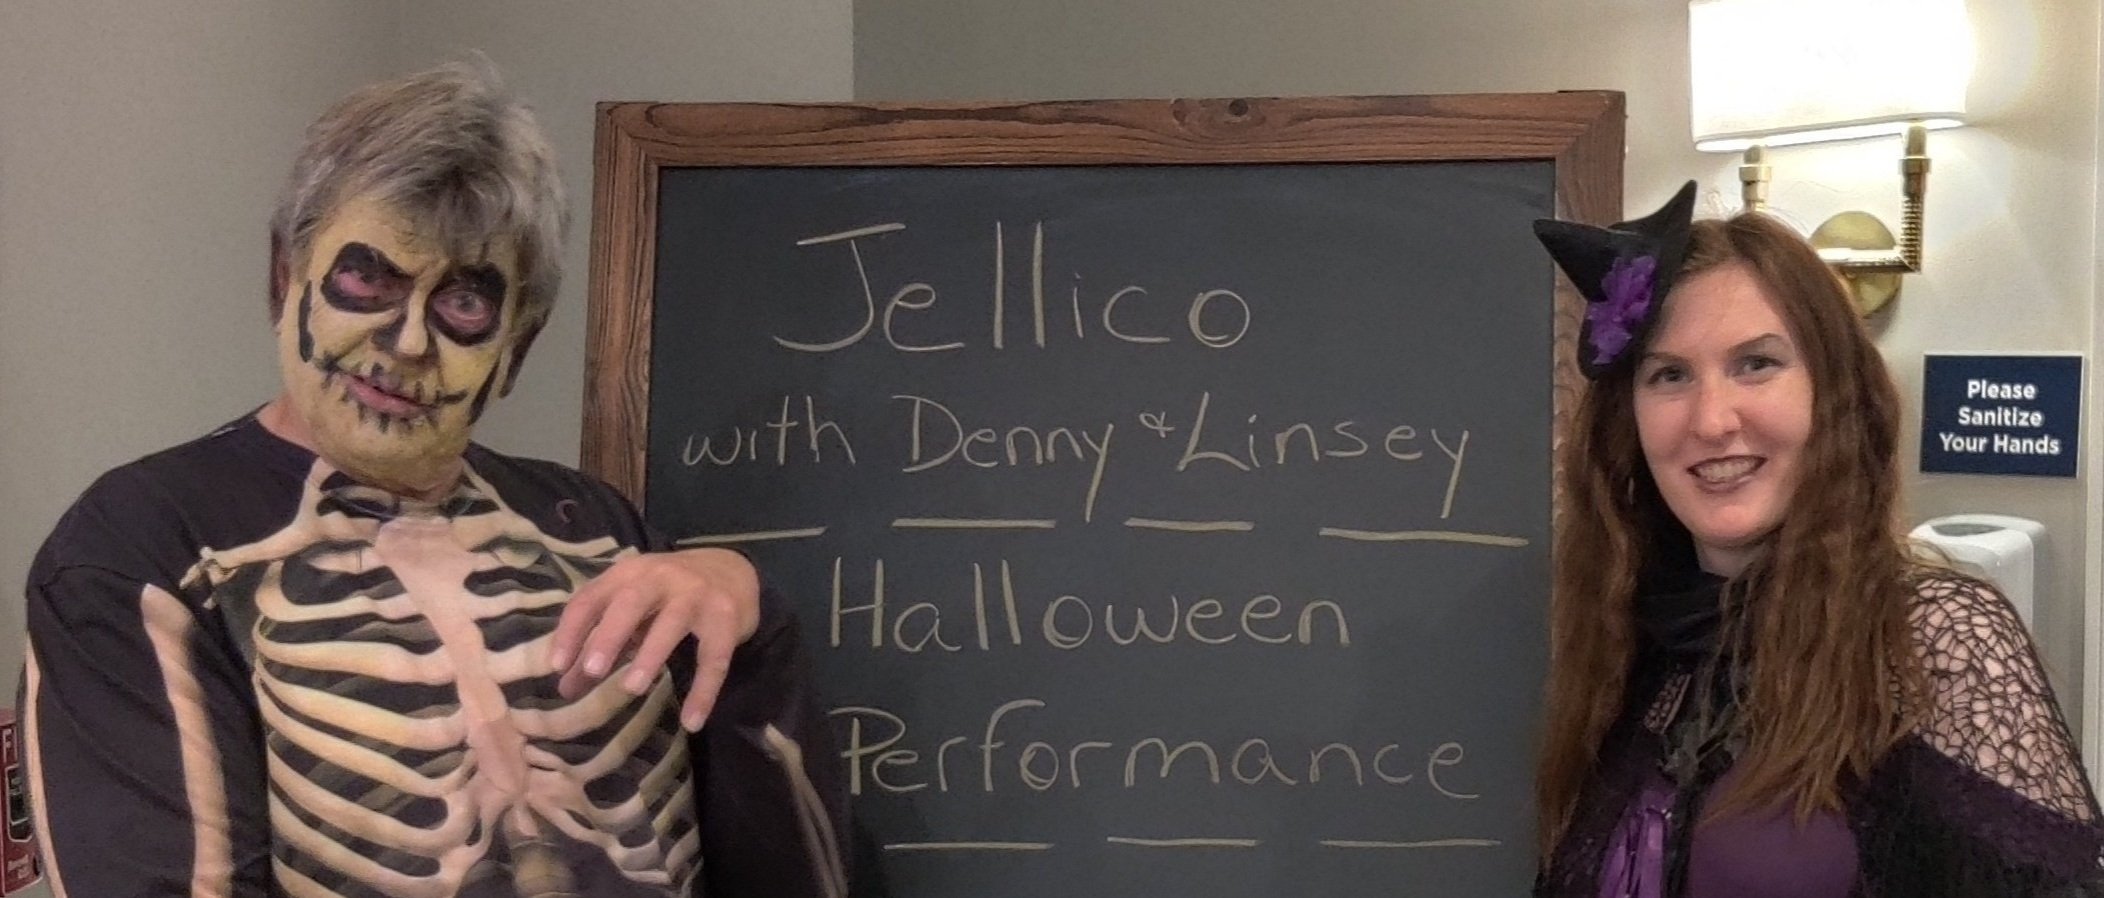 Jellico Halloween at Barrington of Oakley — Linsey Rogers